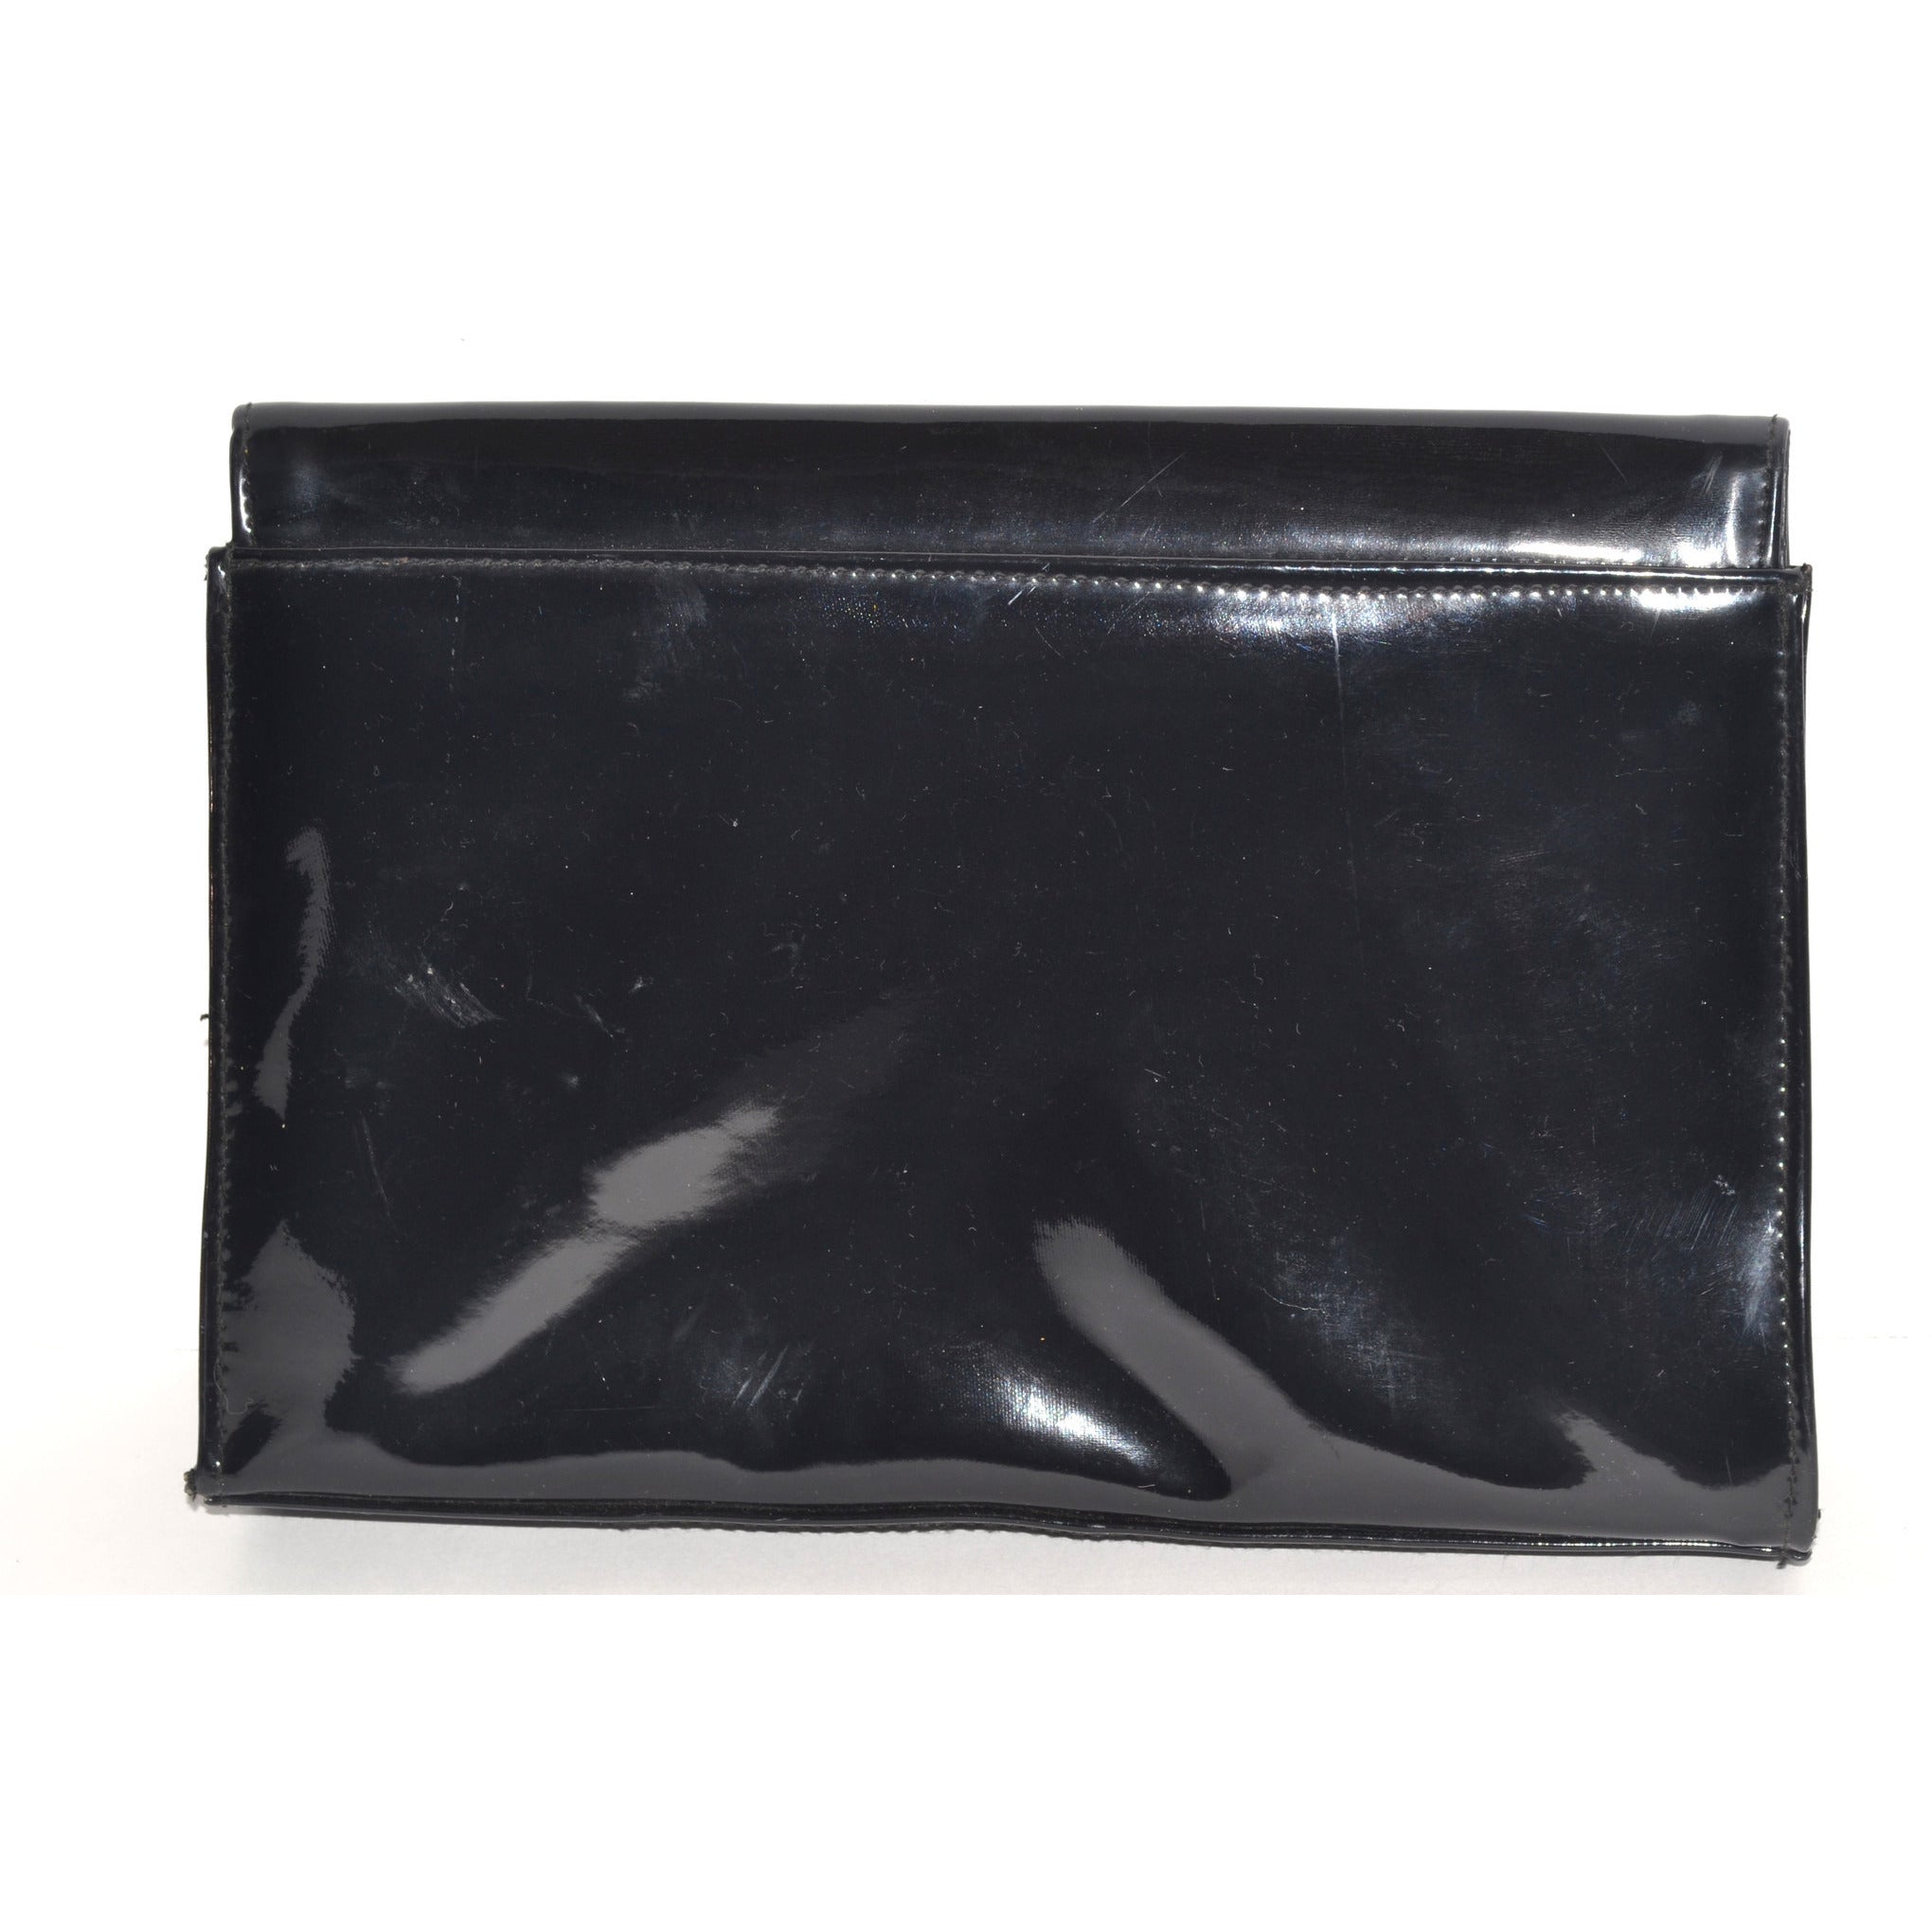 Vintage Black Patent Leather Clutch Purse | Quirky Finds